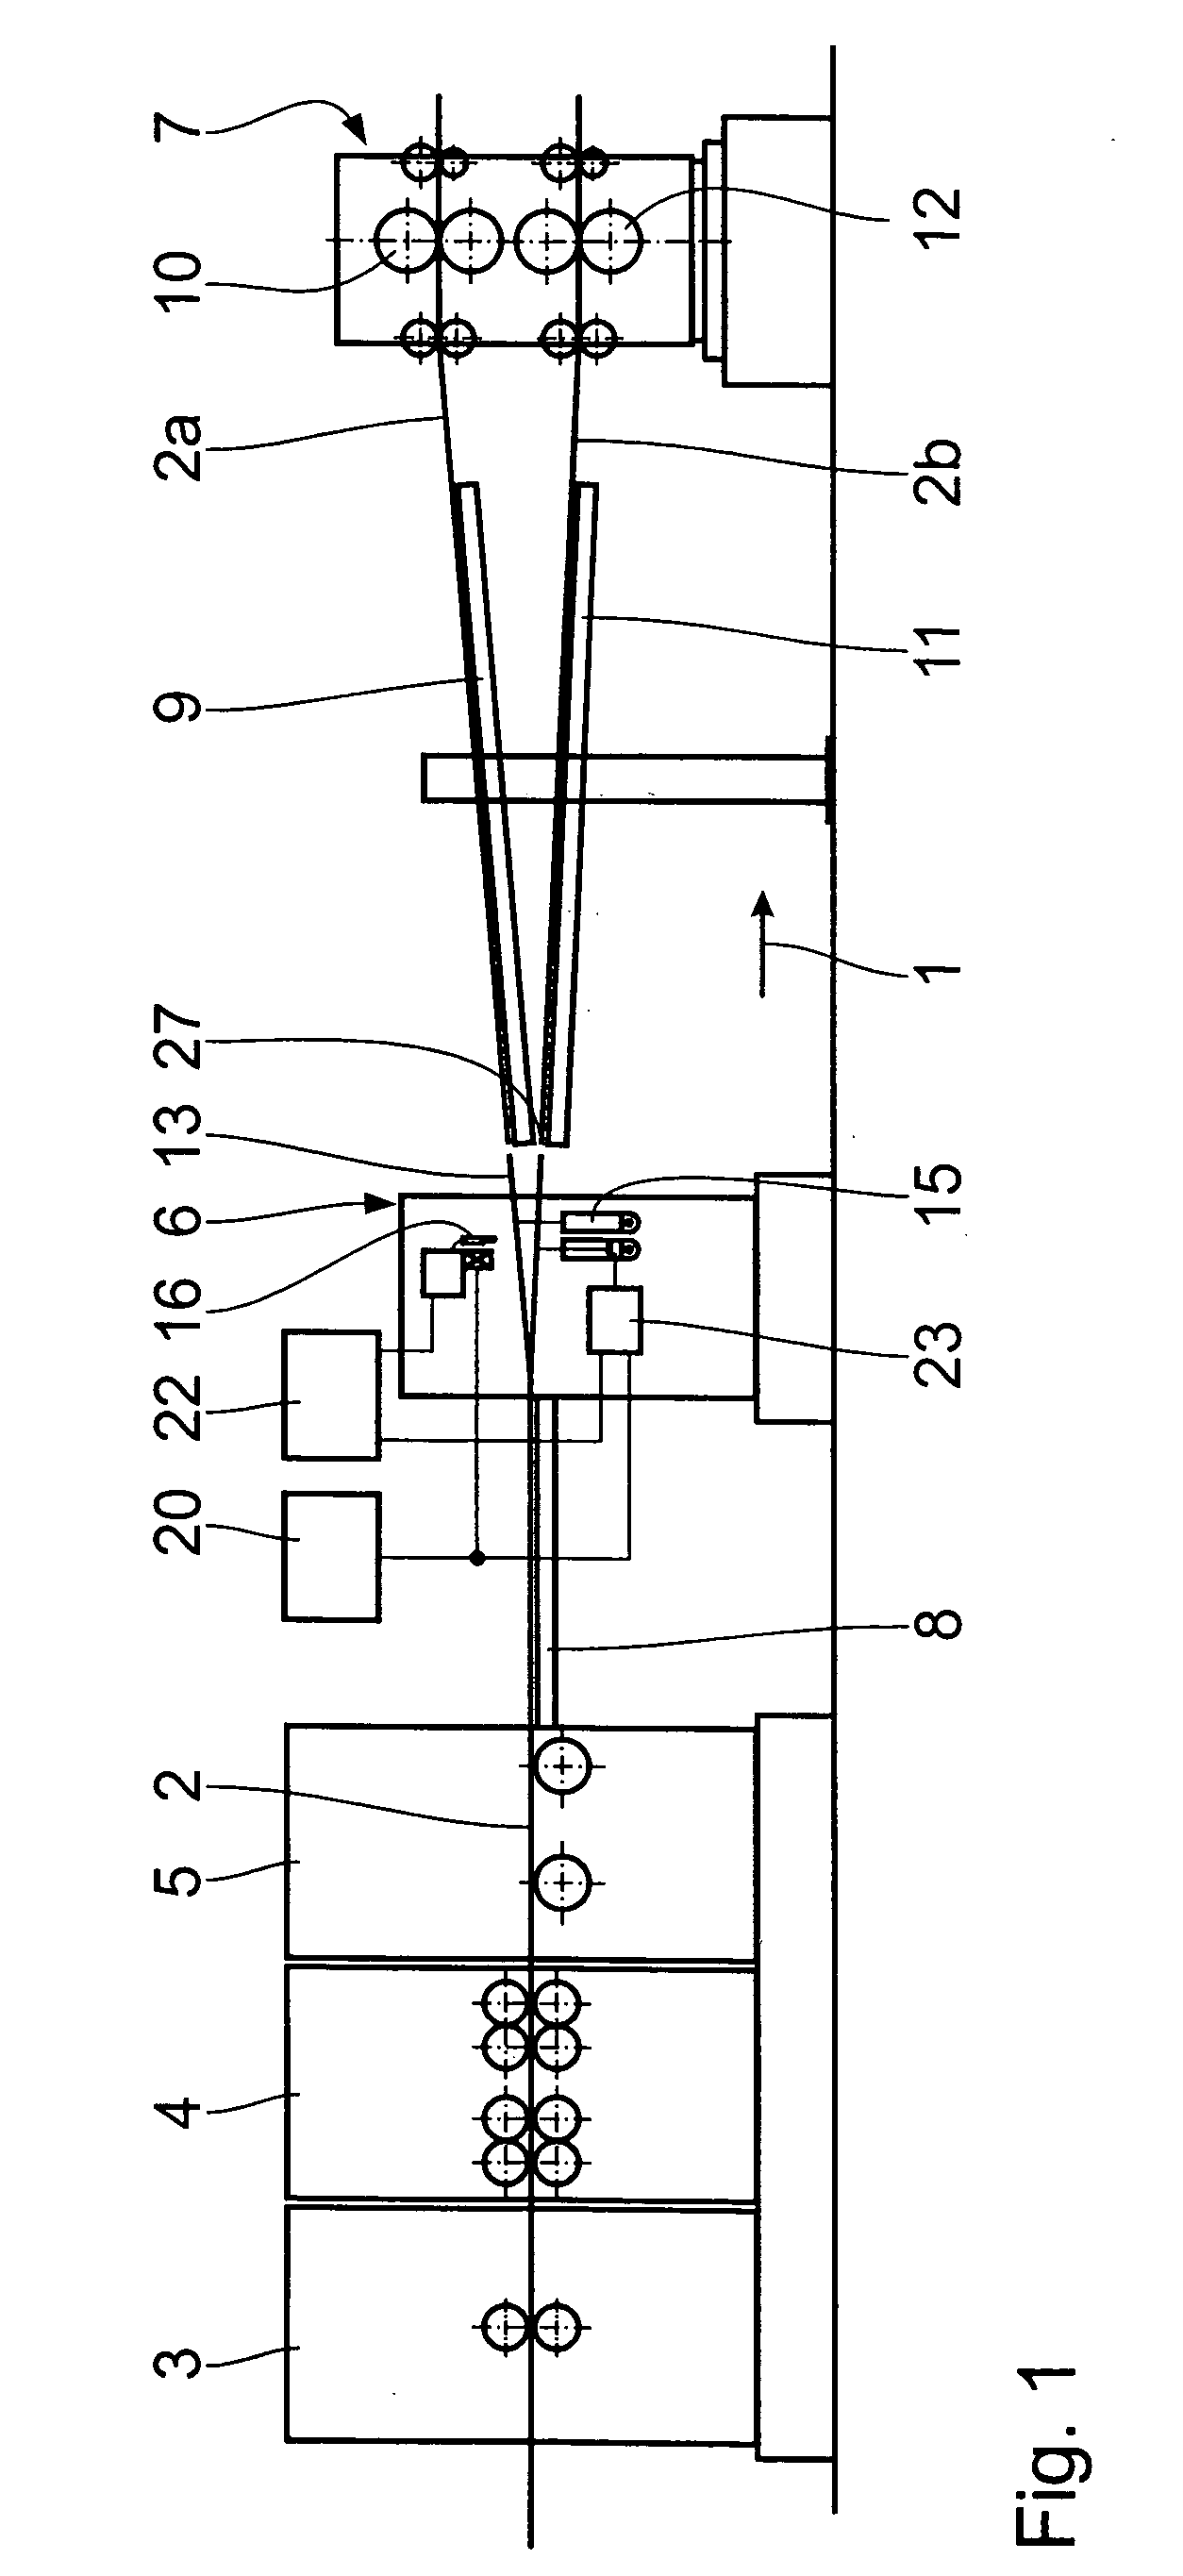 Shunt for a web divided into several sectional webs